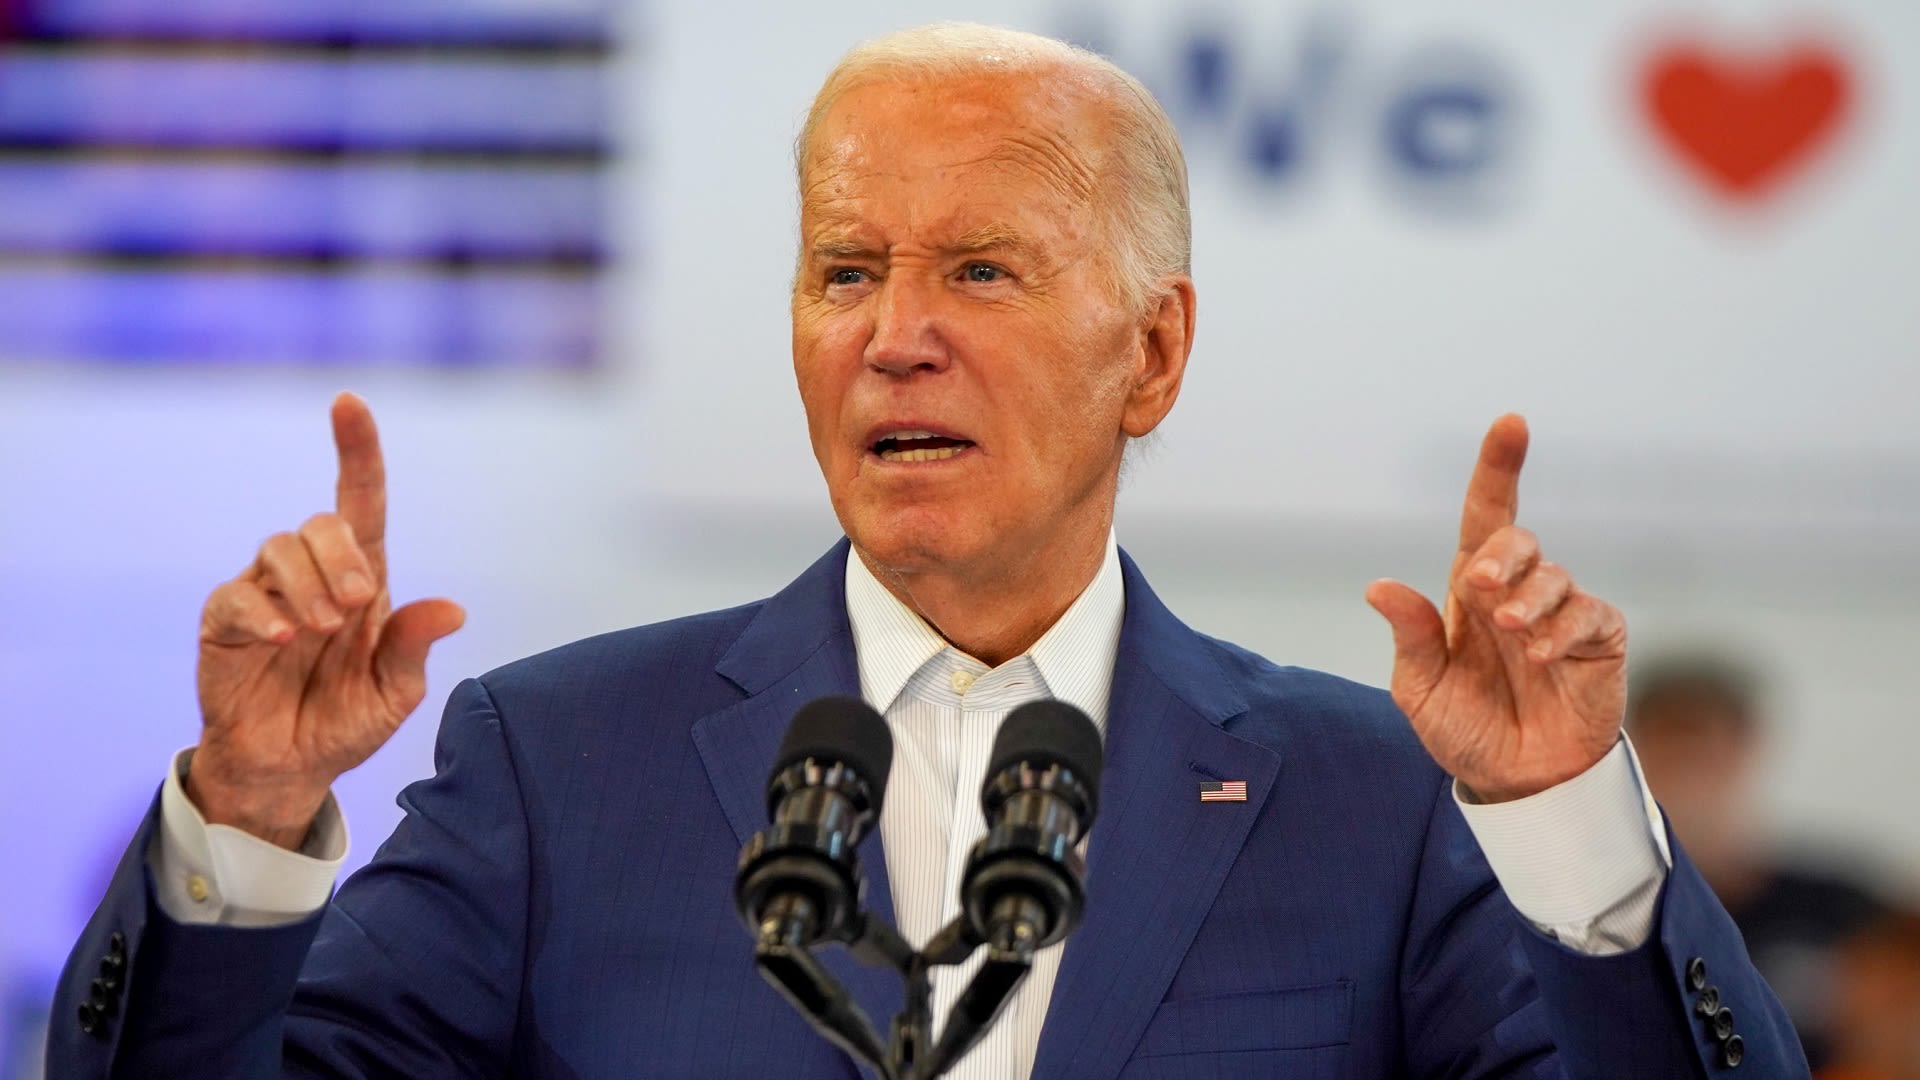 3 Ways Inflation Could Be Impacted If Biden Drops Out of the 2024 Election